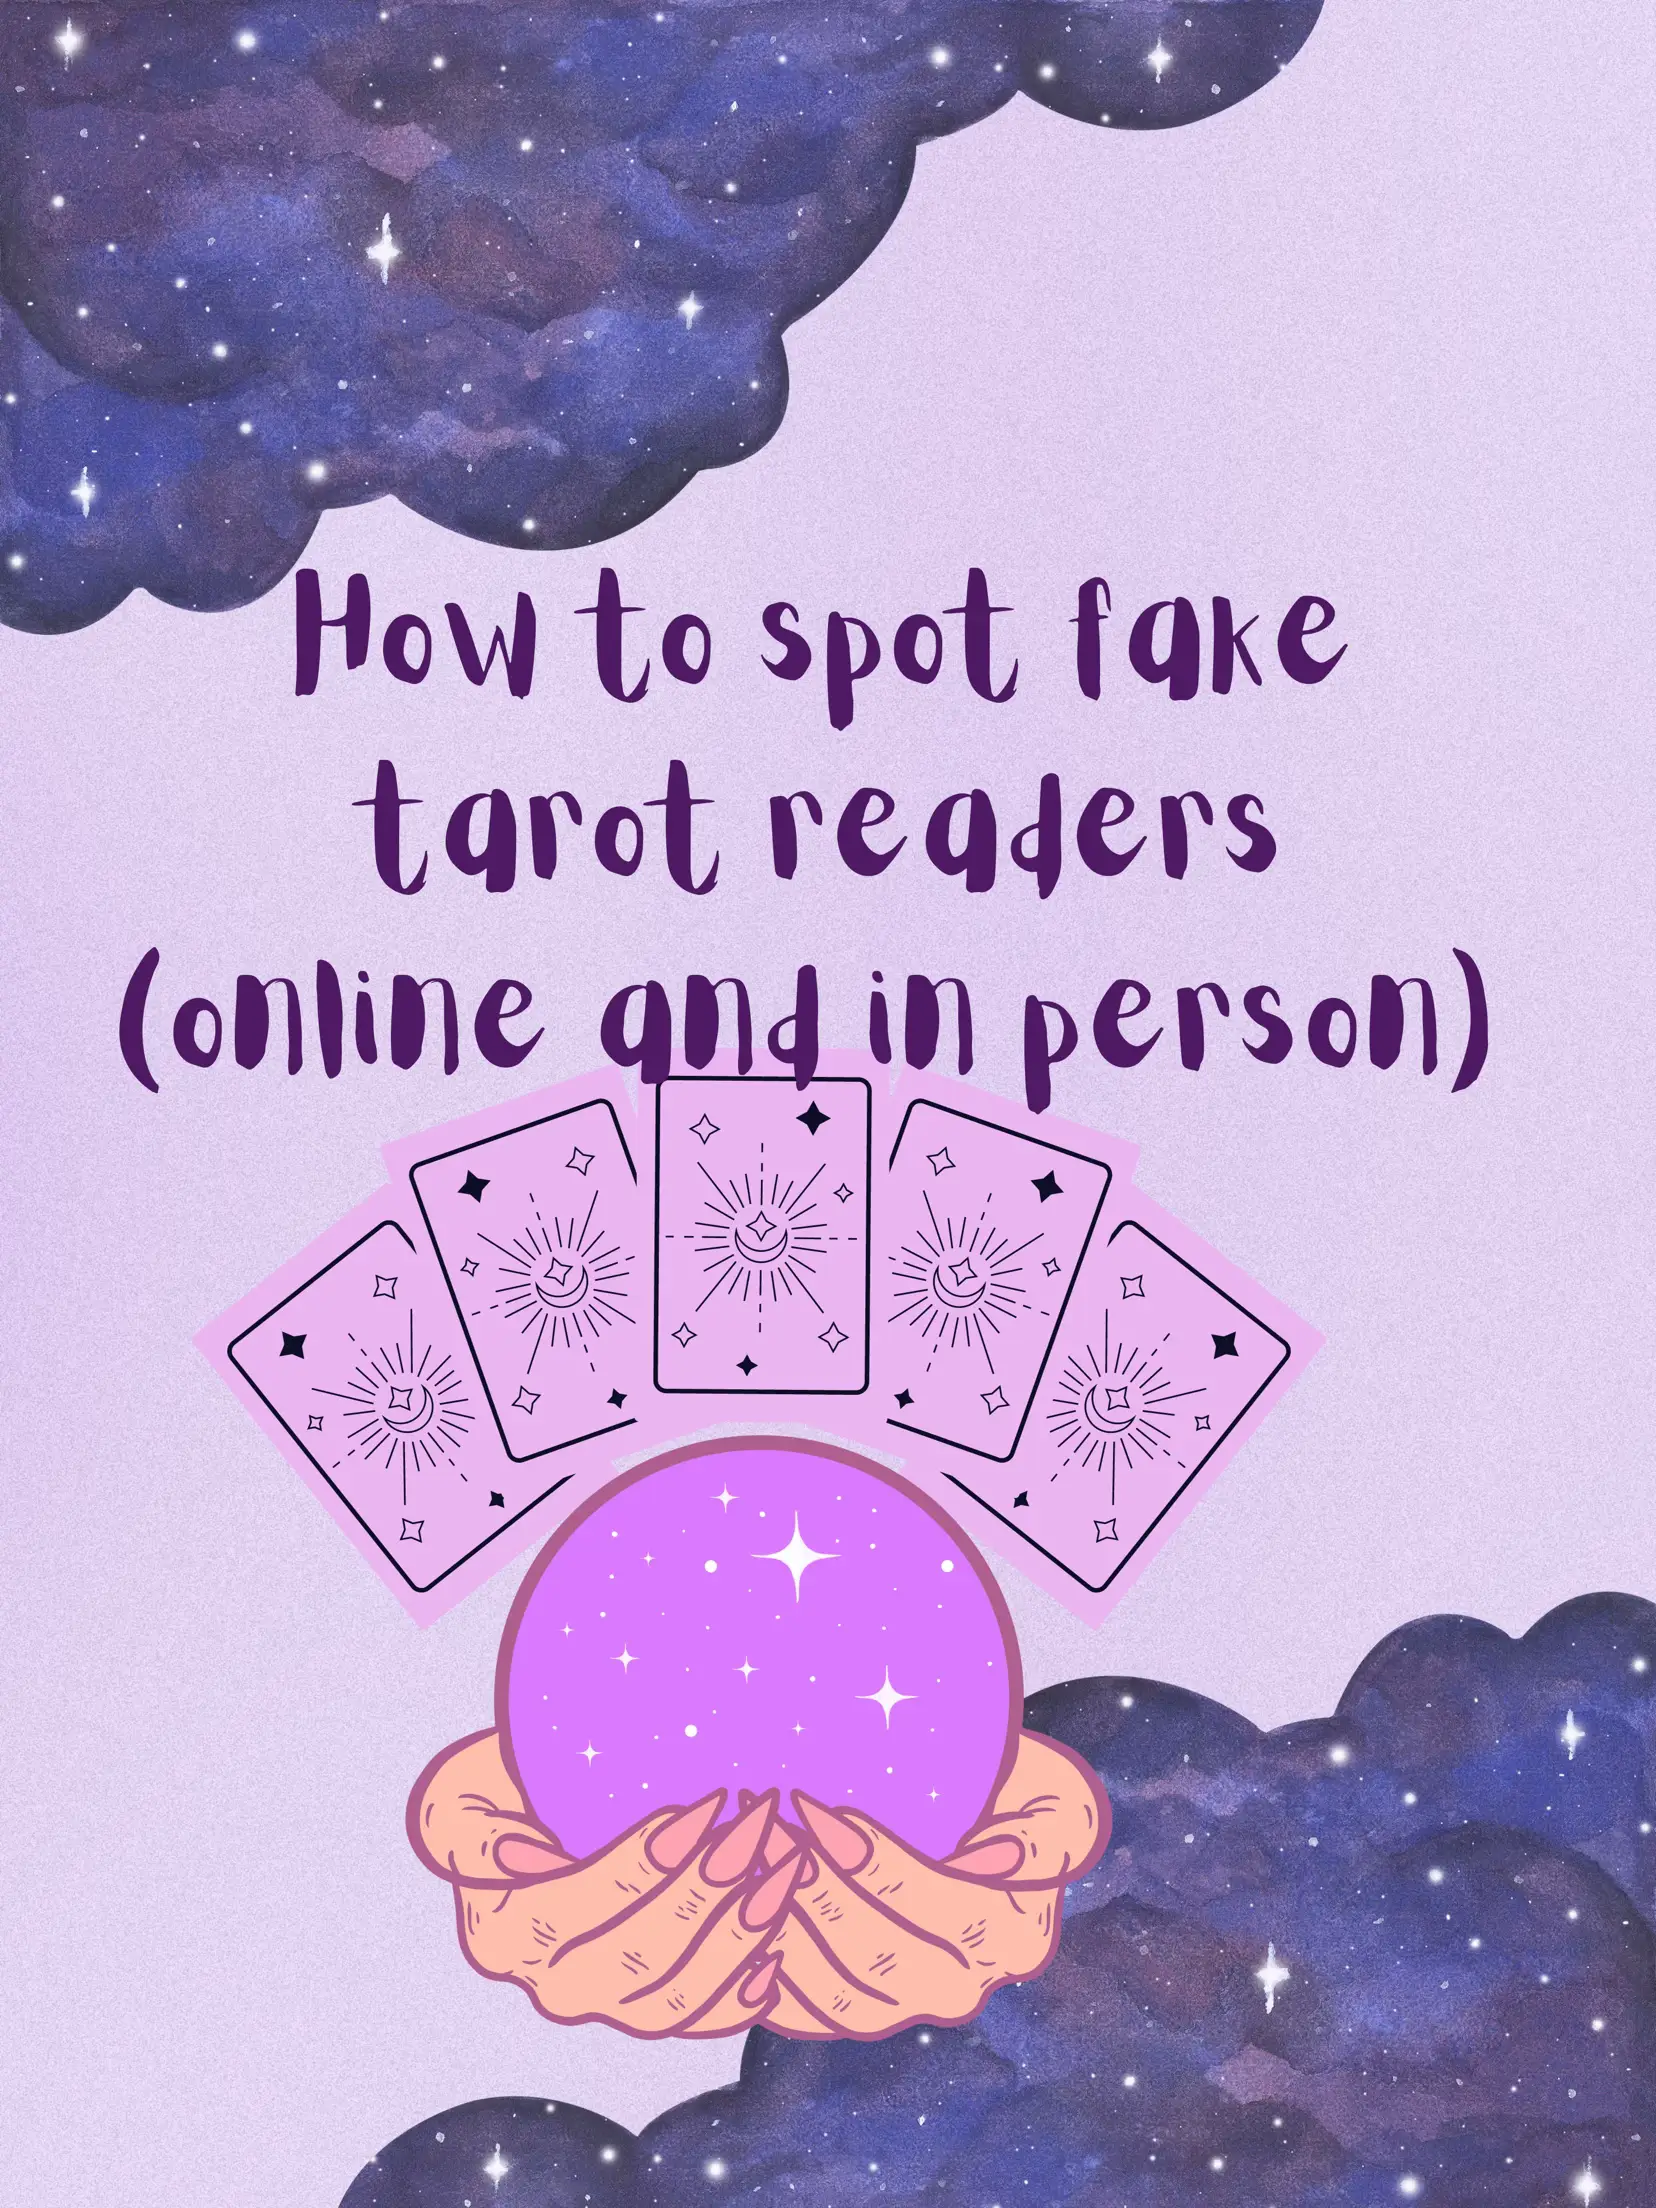  A cartoon image of a sun with the words "How to spot fake tarot readers" written on it.